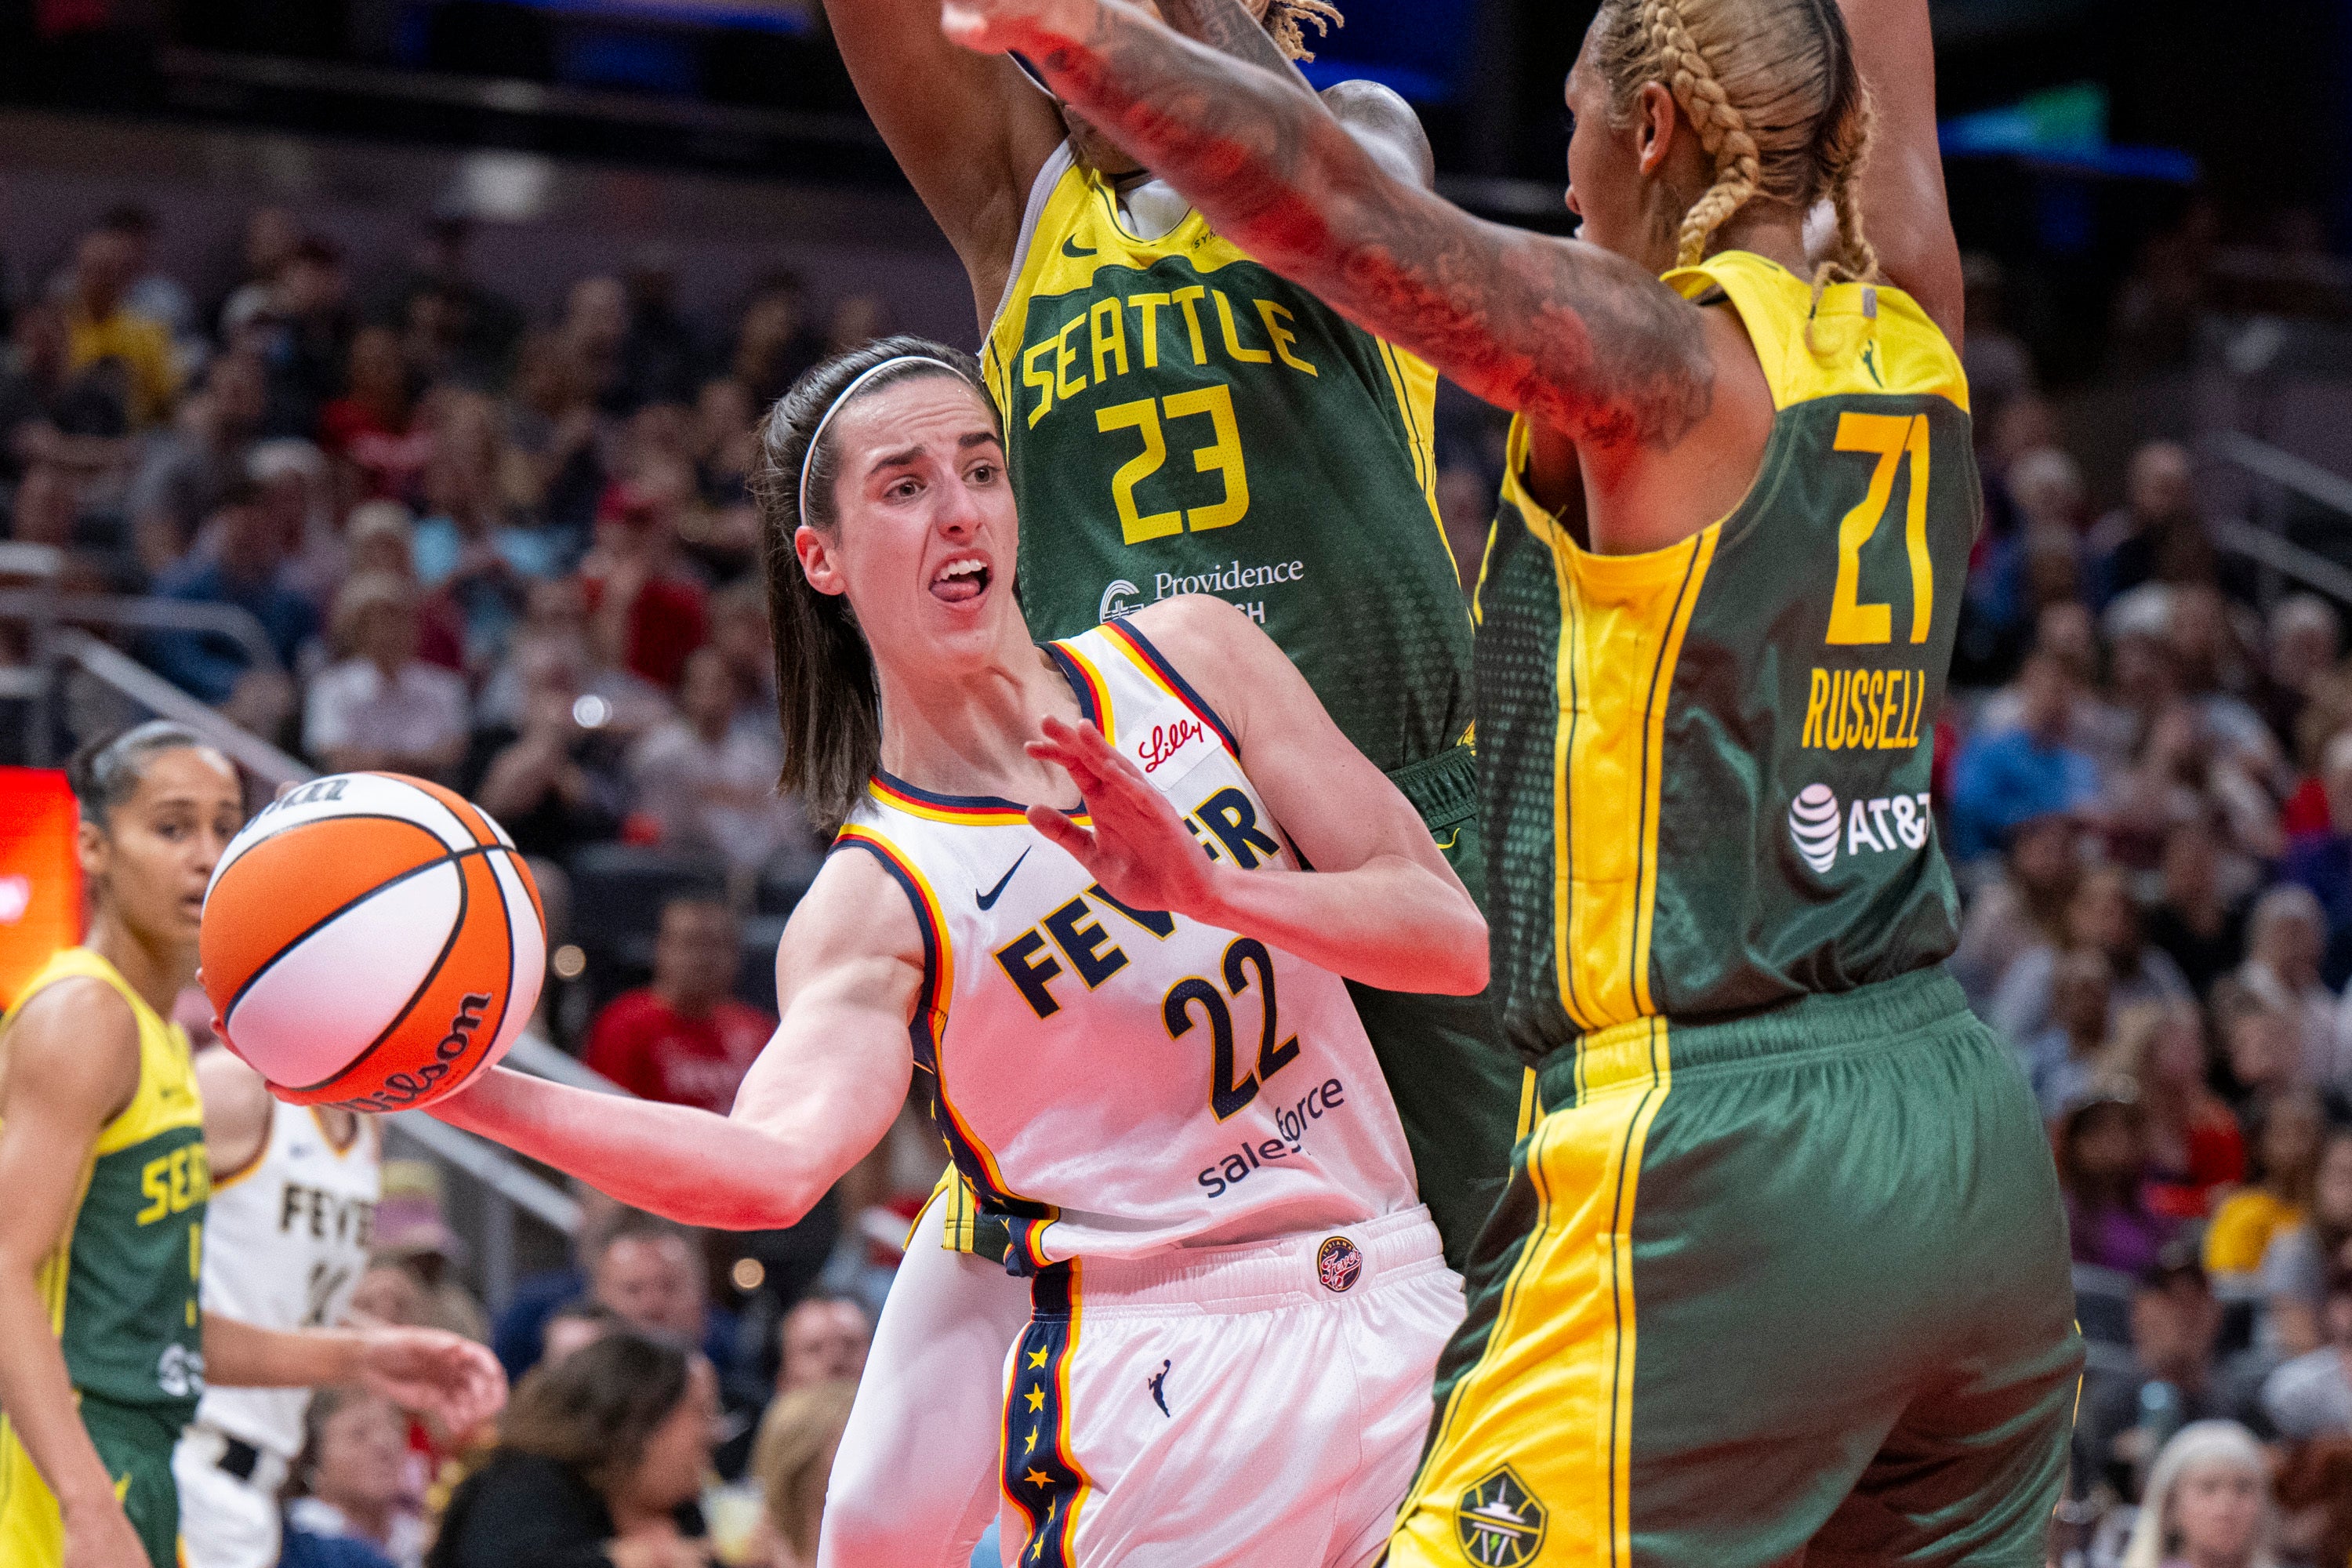 Despite the growing popularity of the WNBA, the league is hemorrhaging money, with losses expected to rise to up to $50m this year, sources have said